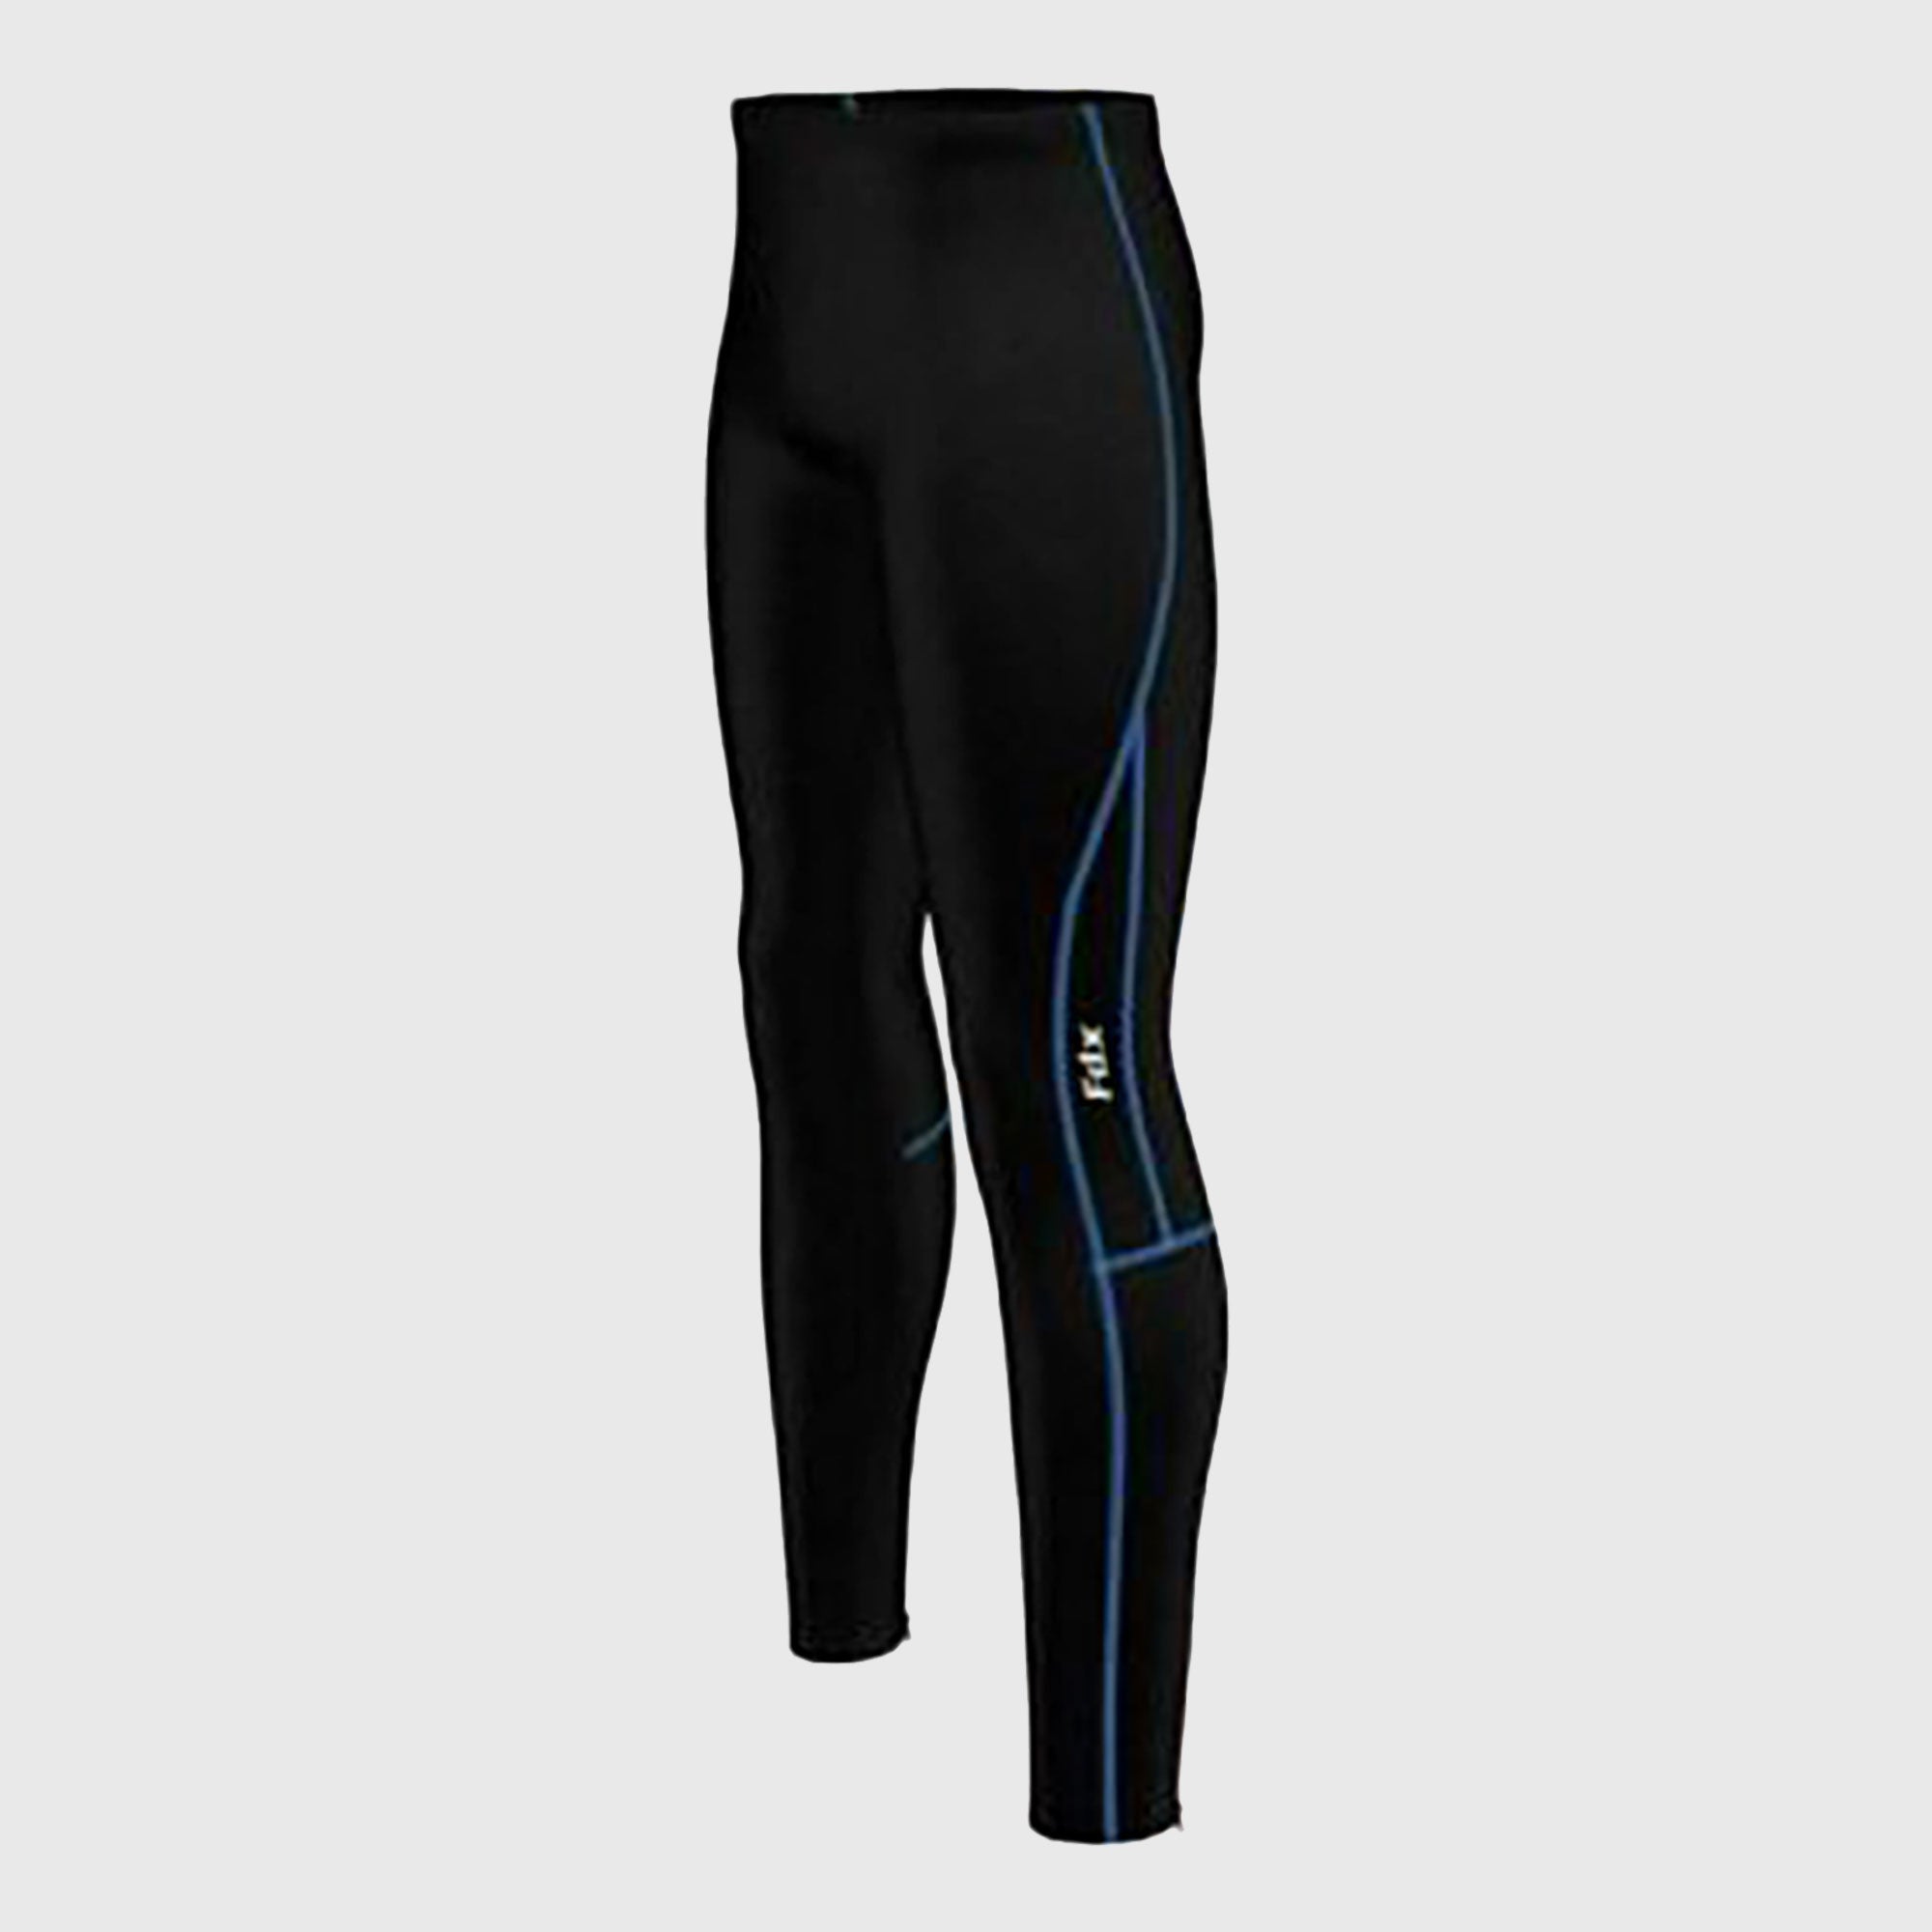 Related: Blue Men 6 Cycling Tights